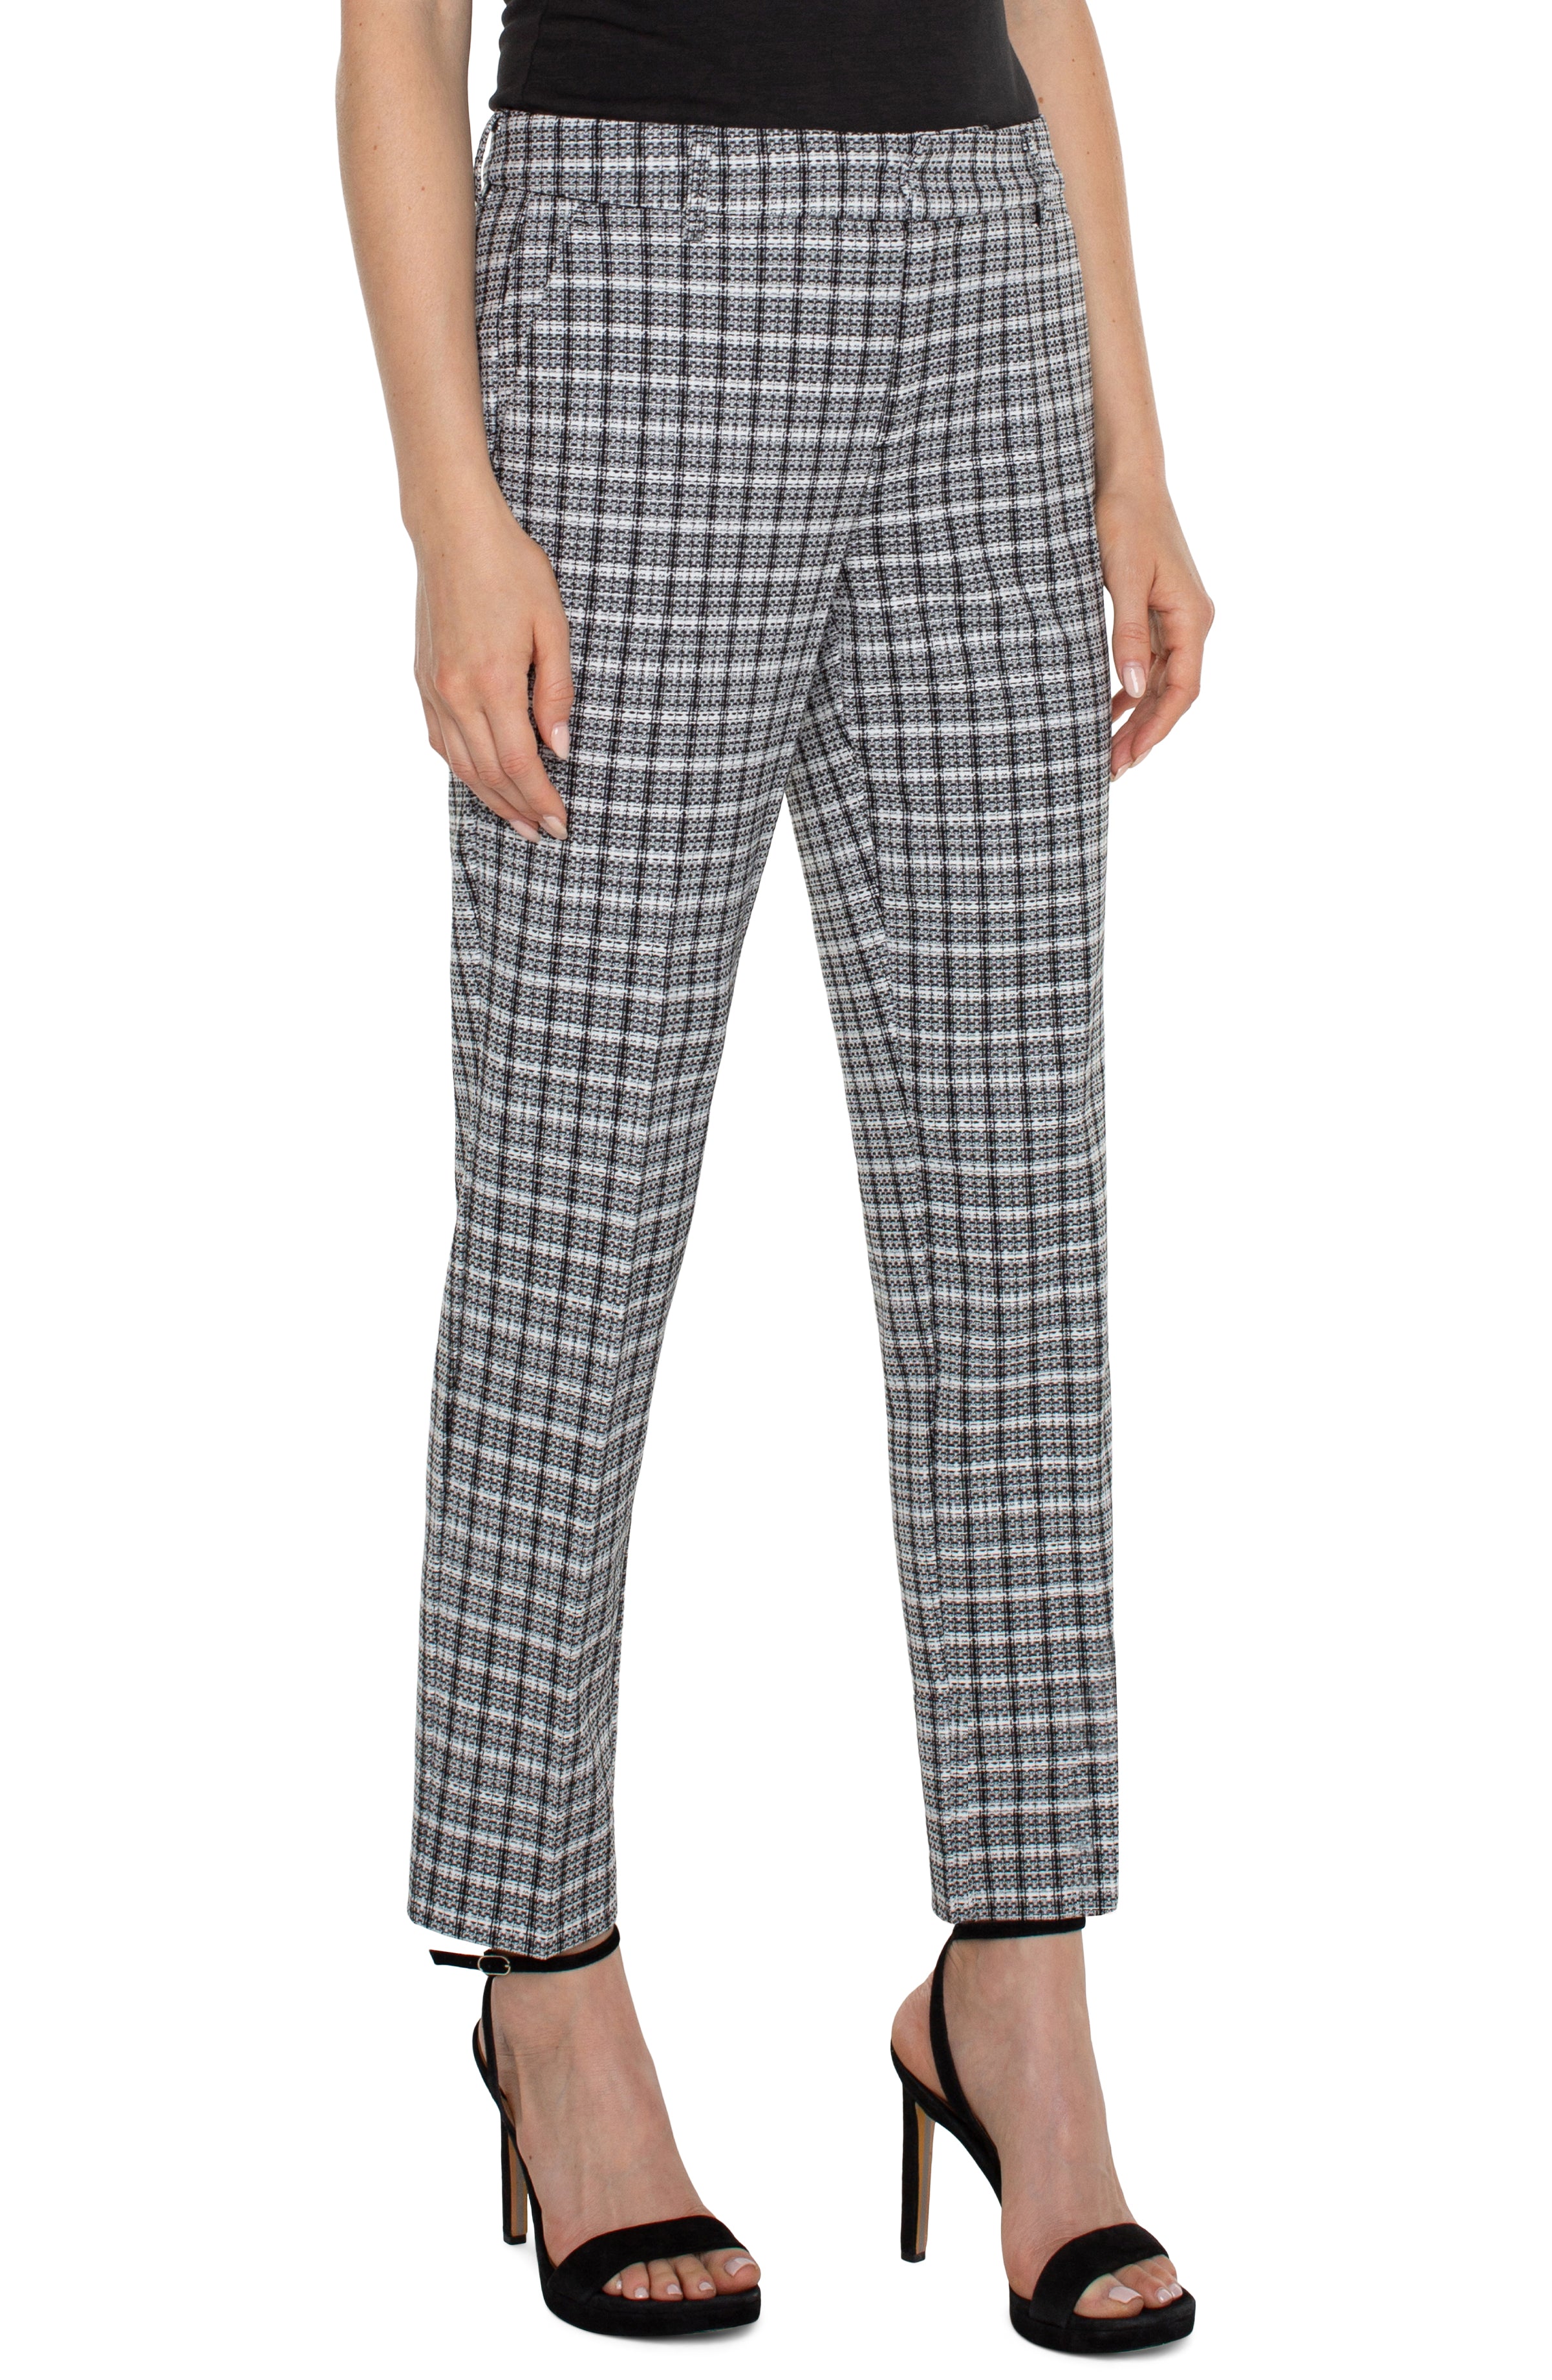 Liverpool Kelsey Trouser black/white Plaid Front View